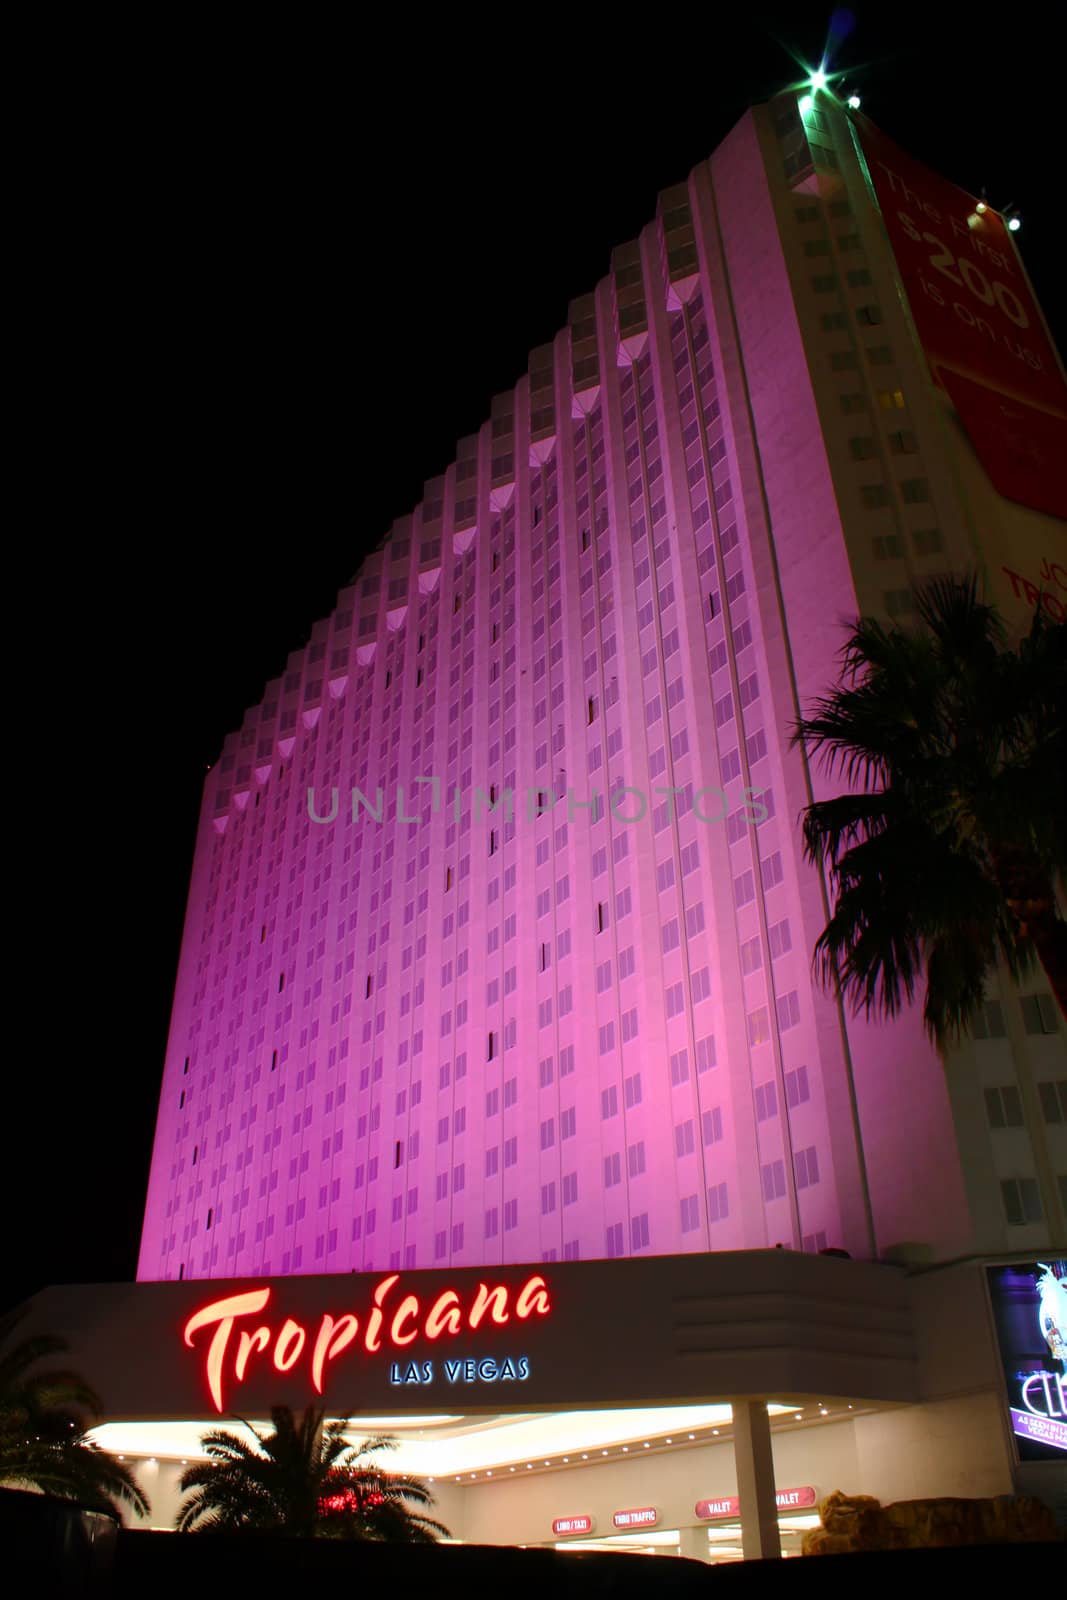 Tropicana Las Vegas Hotel and Resort by Wirepec